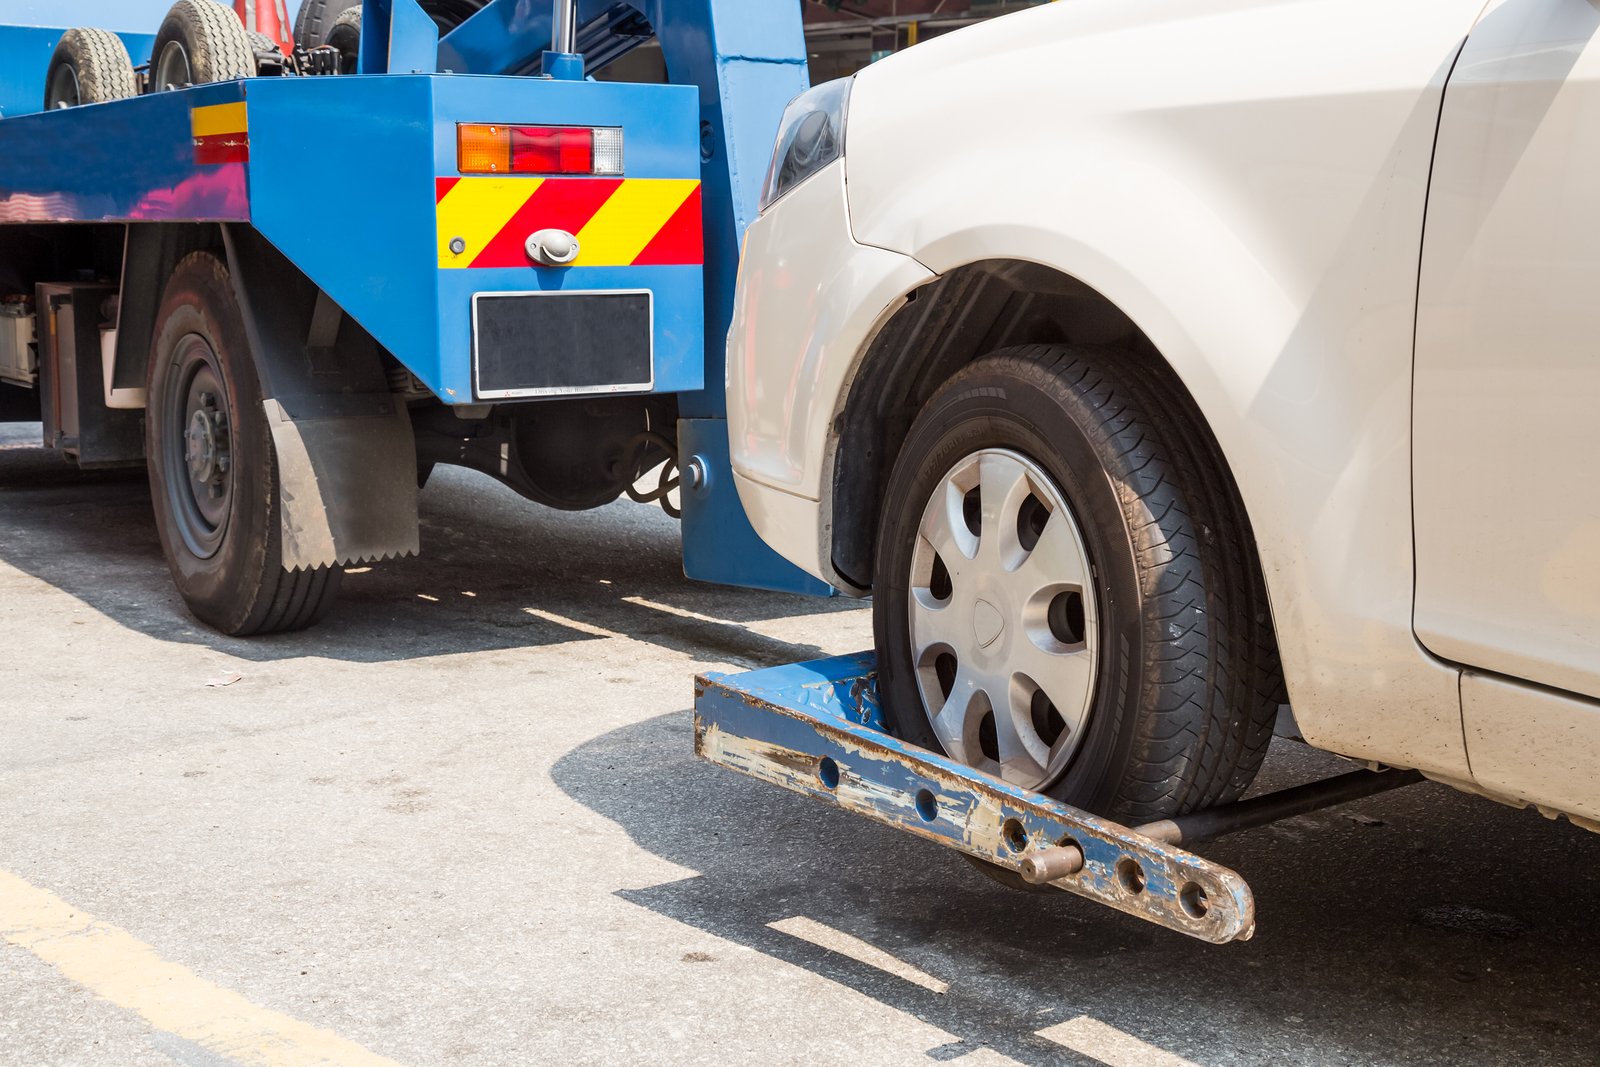 How to Find Out Who Towed Your Car